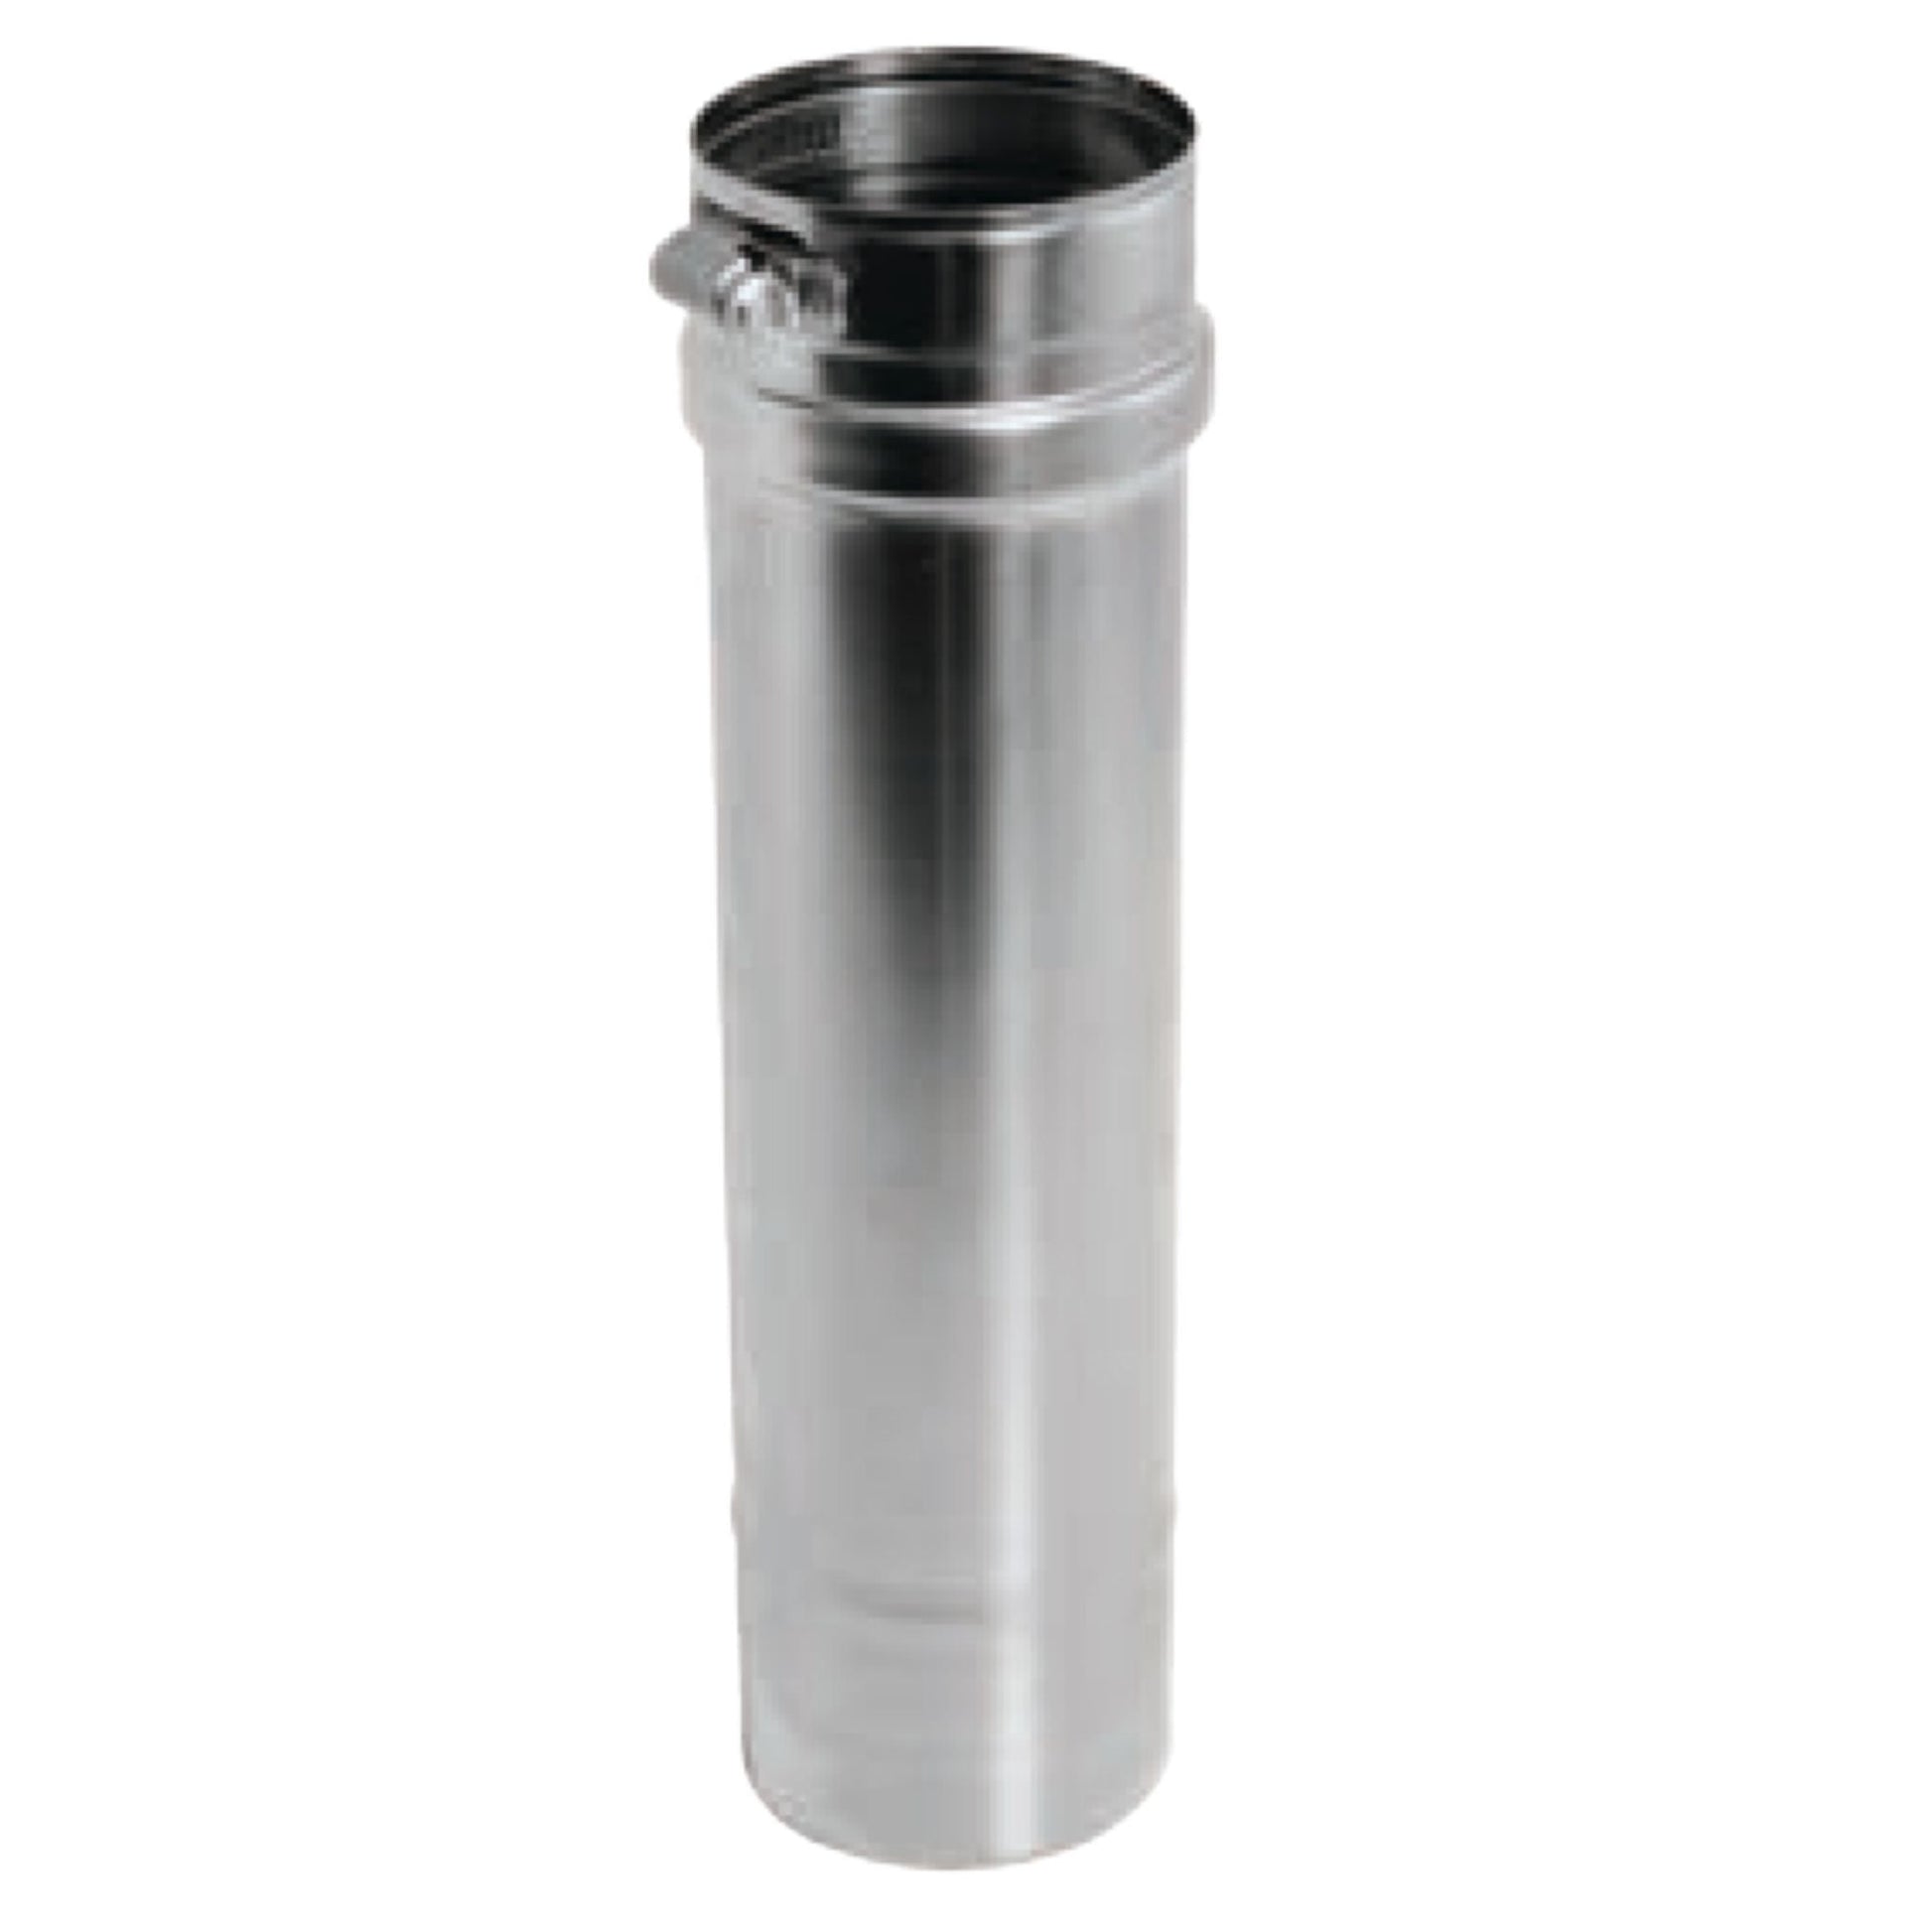 DuraVent FasNSeal 9" x 12" 29-4C Stainless Steel Vent Length